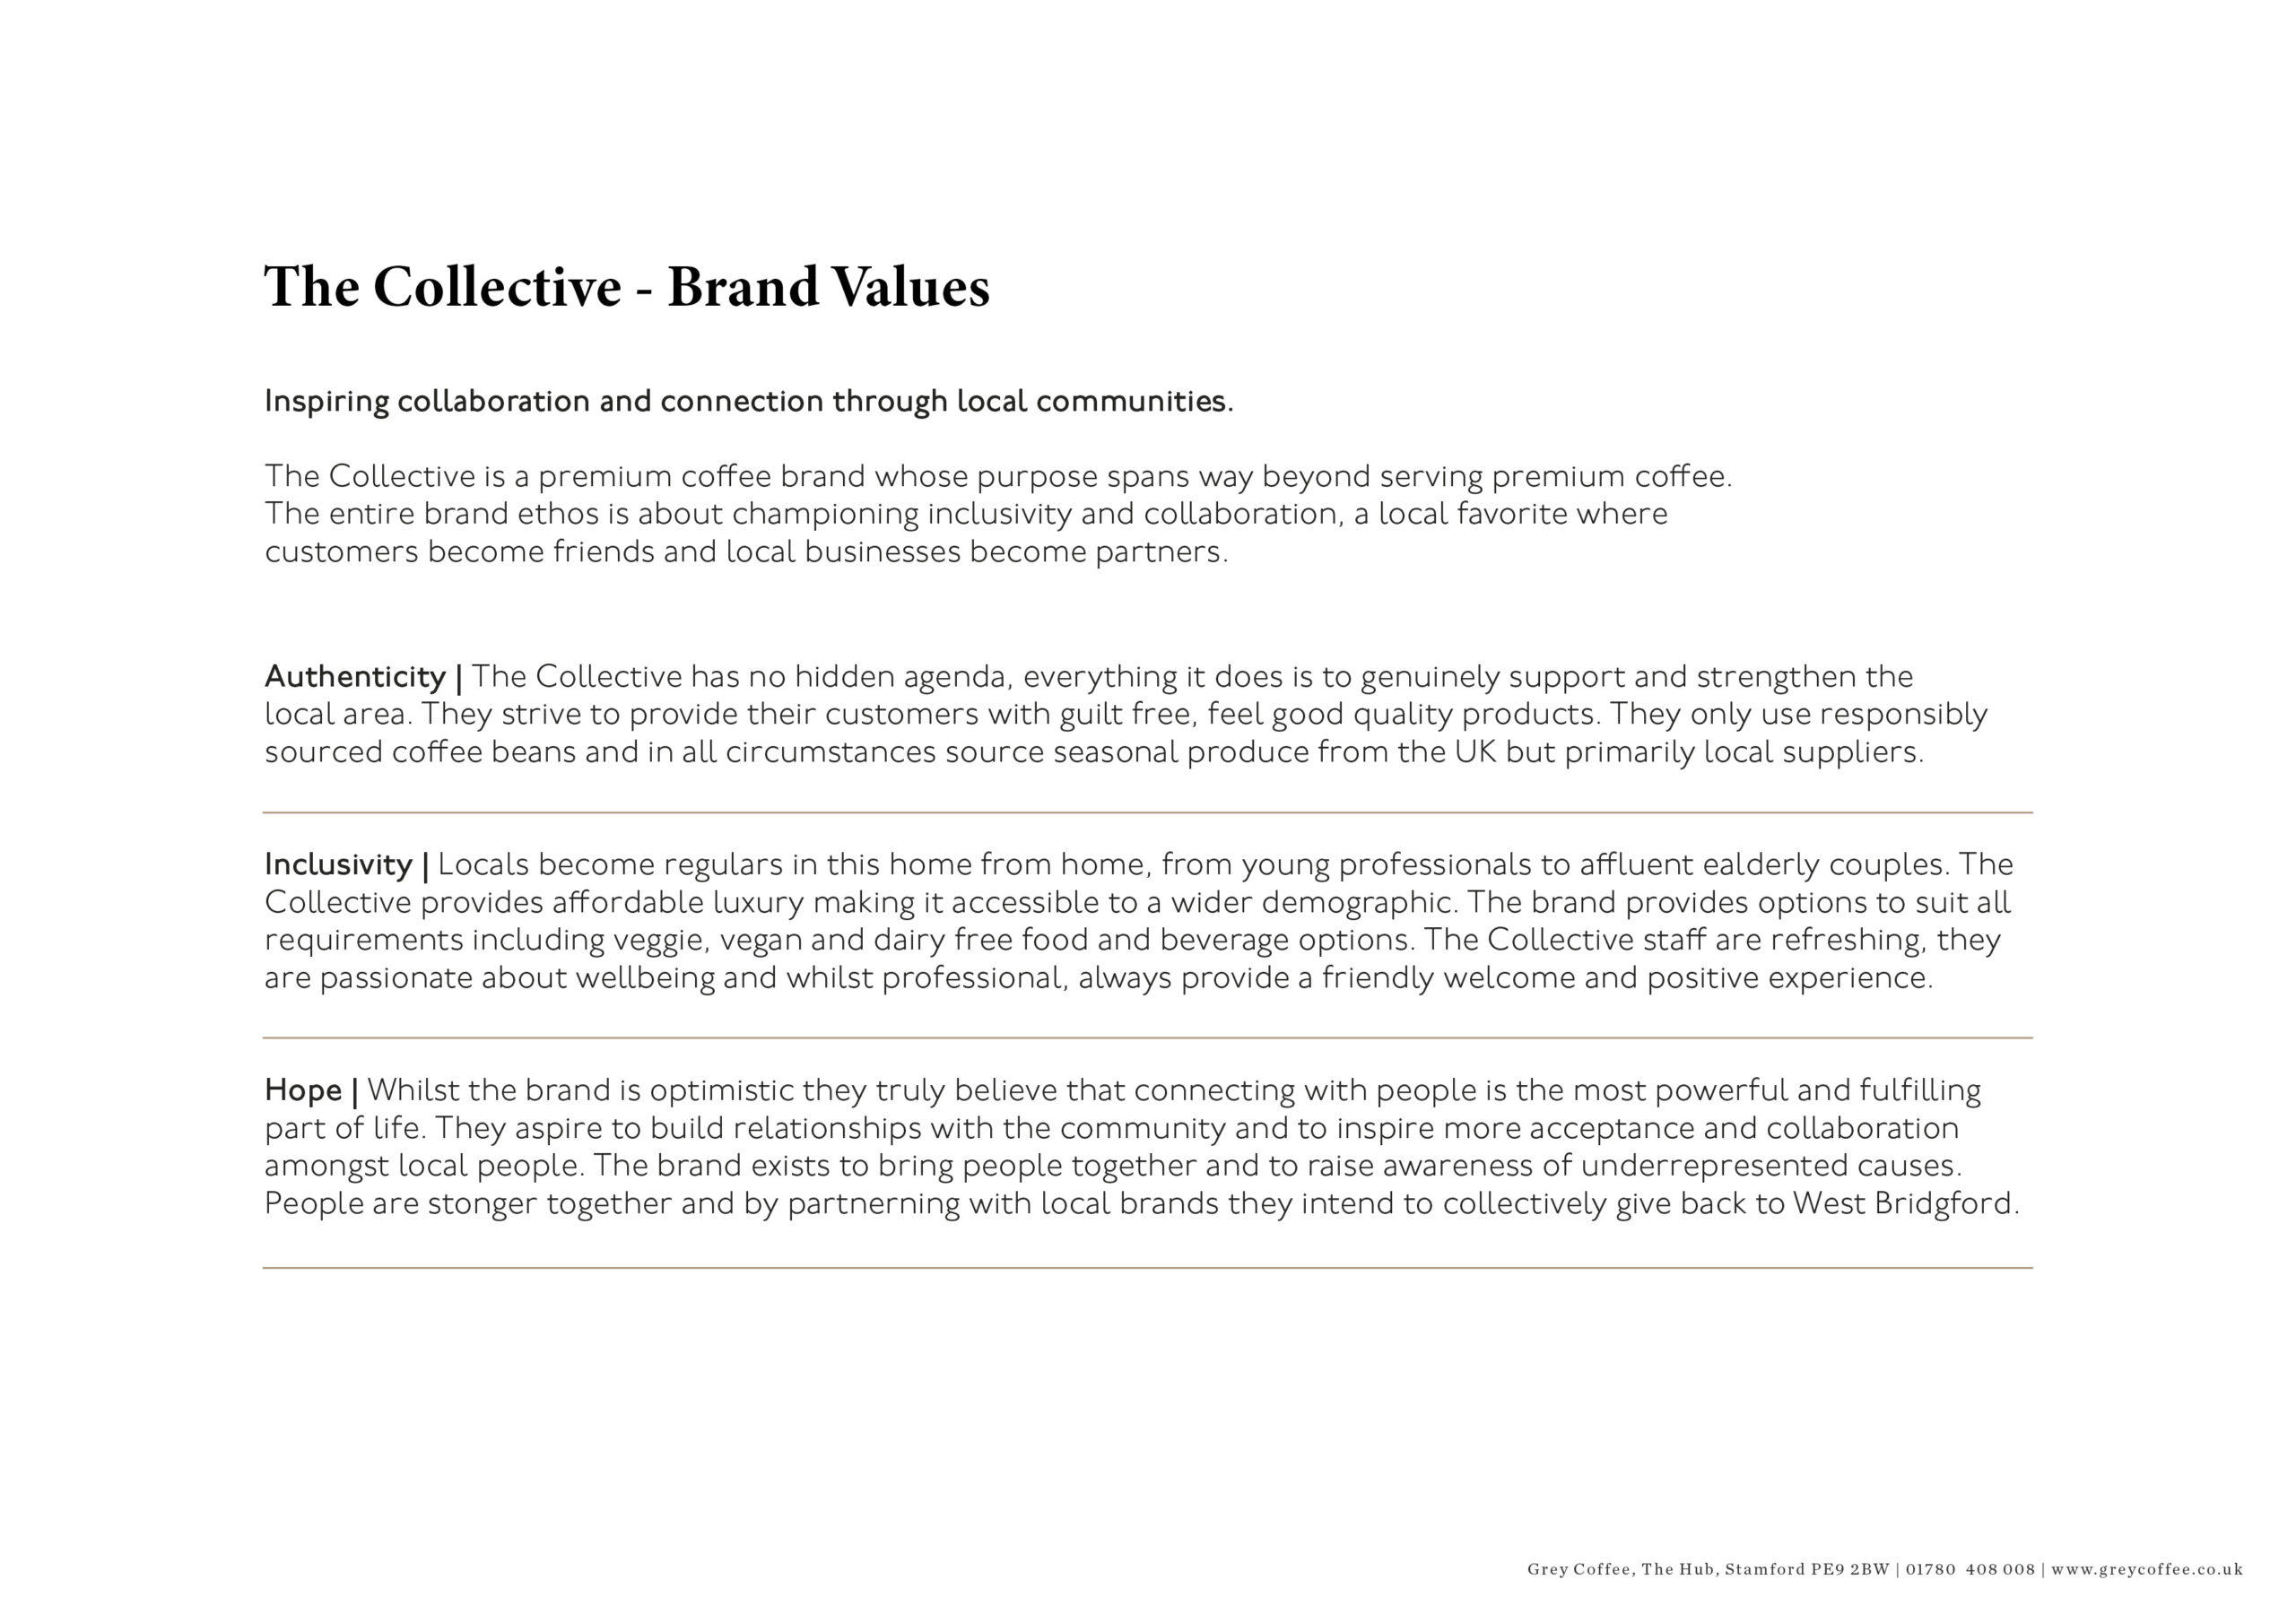 The Collective Coffee Shop - Brand Values Words & Copy